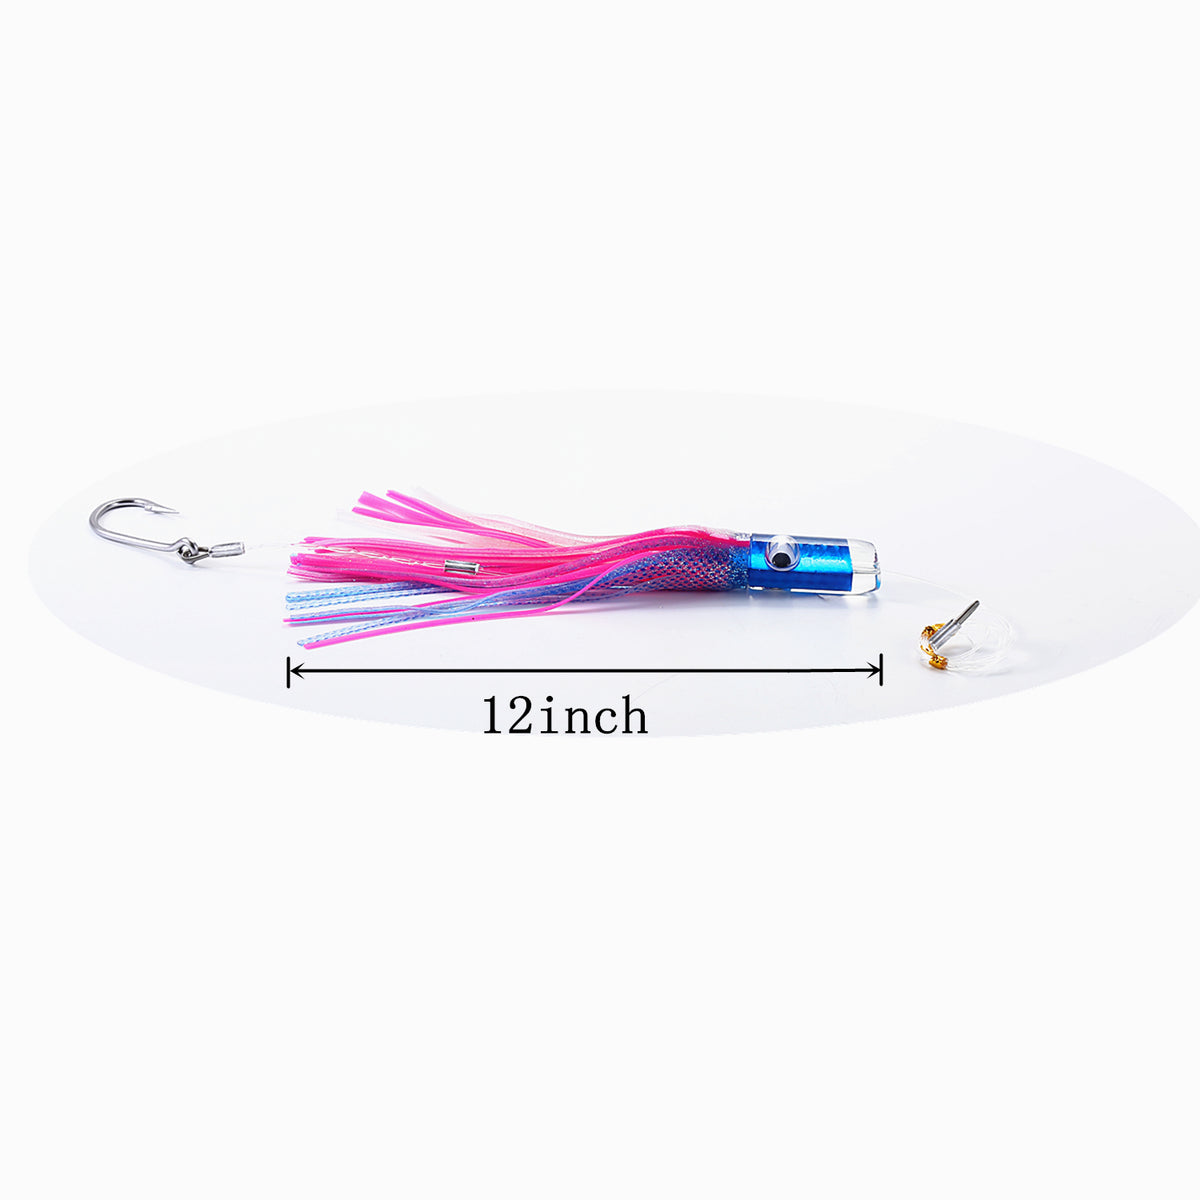 Superior Trolling Skirts for Marlin and Tuna Lures